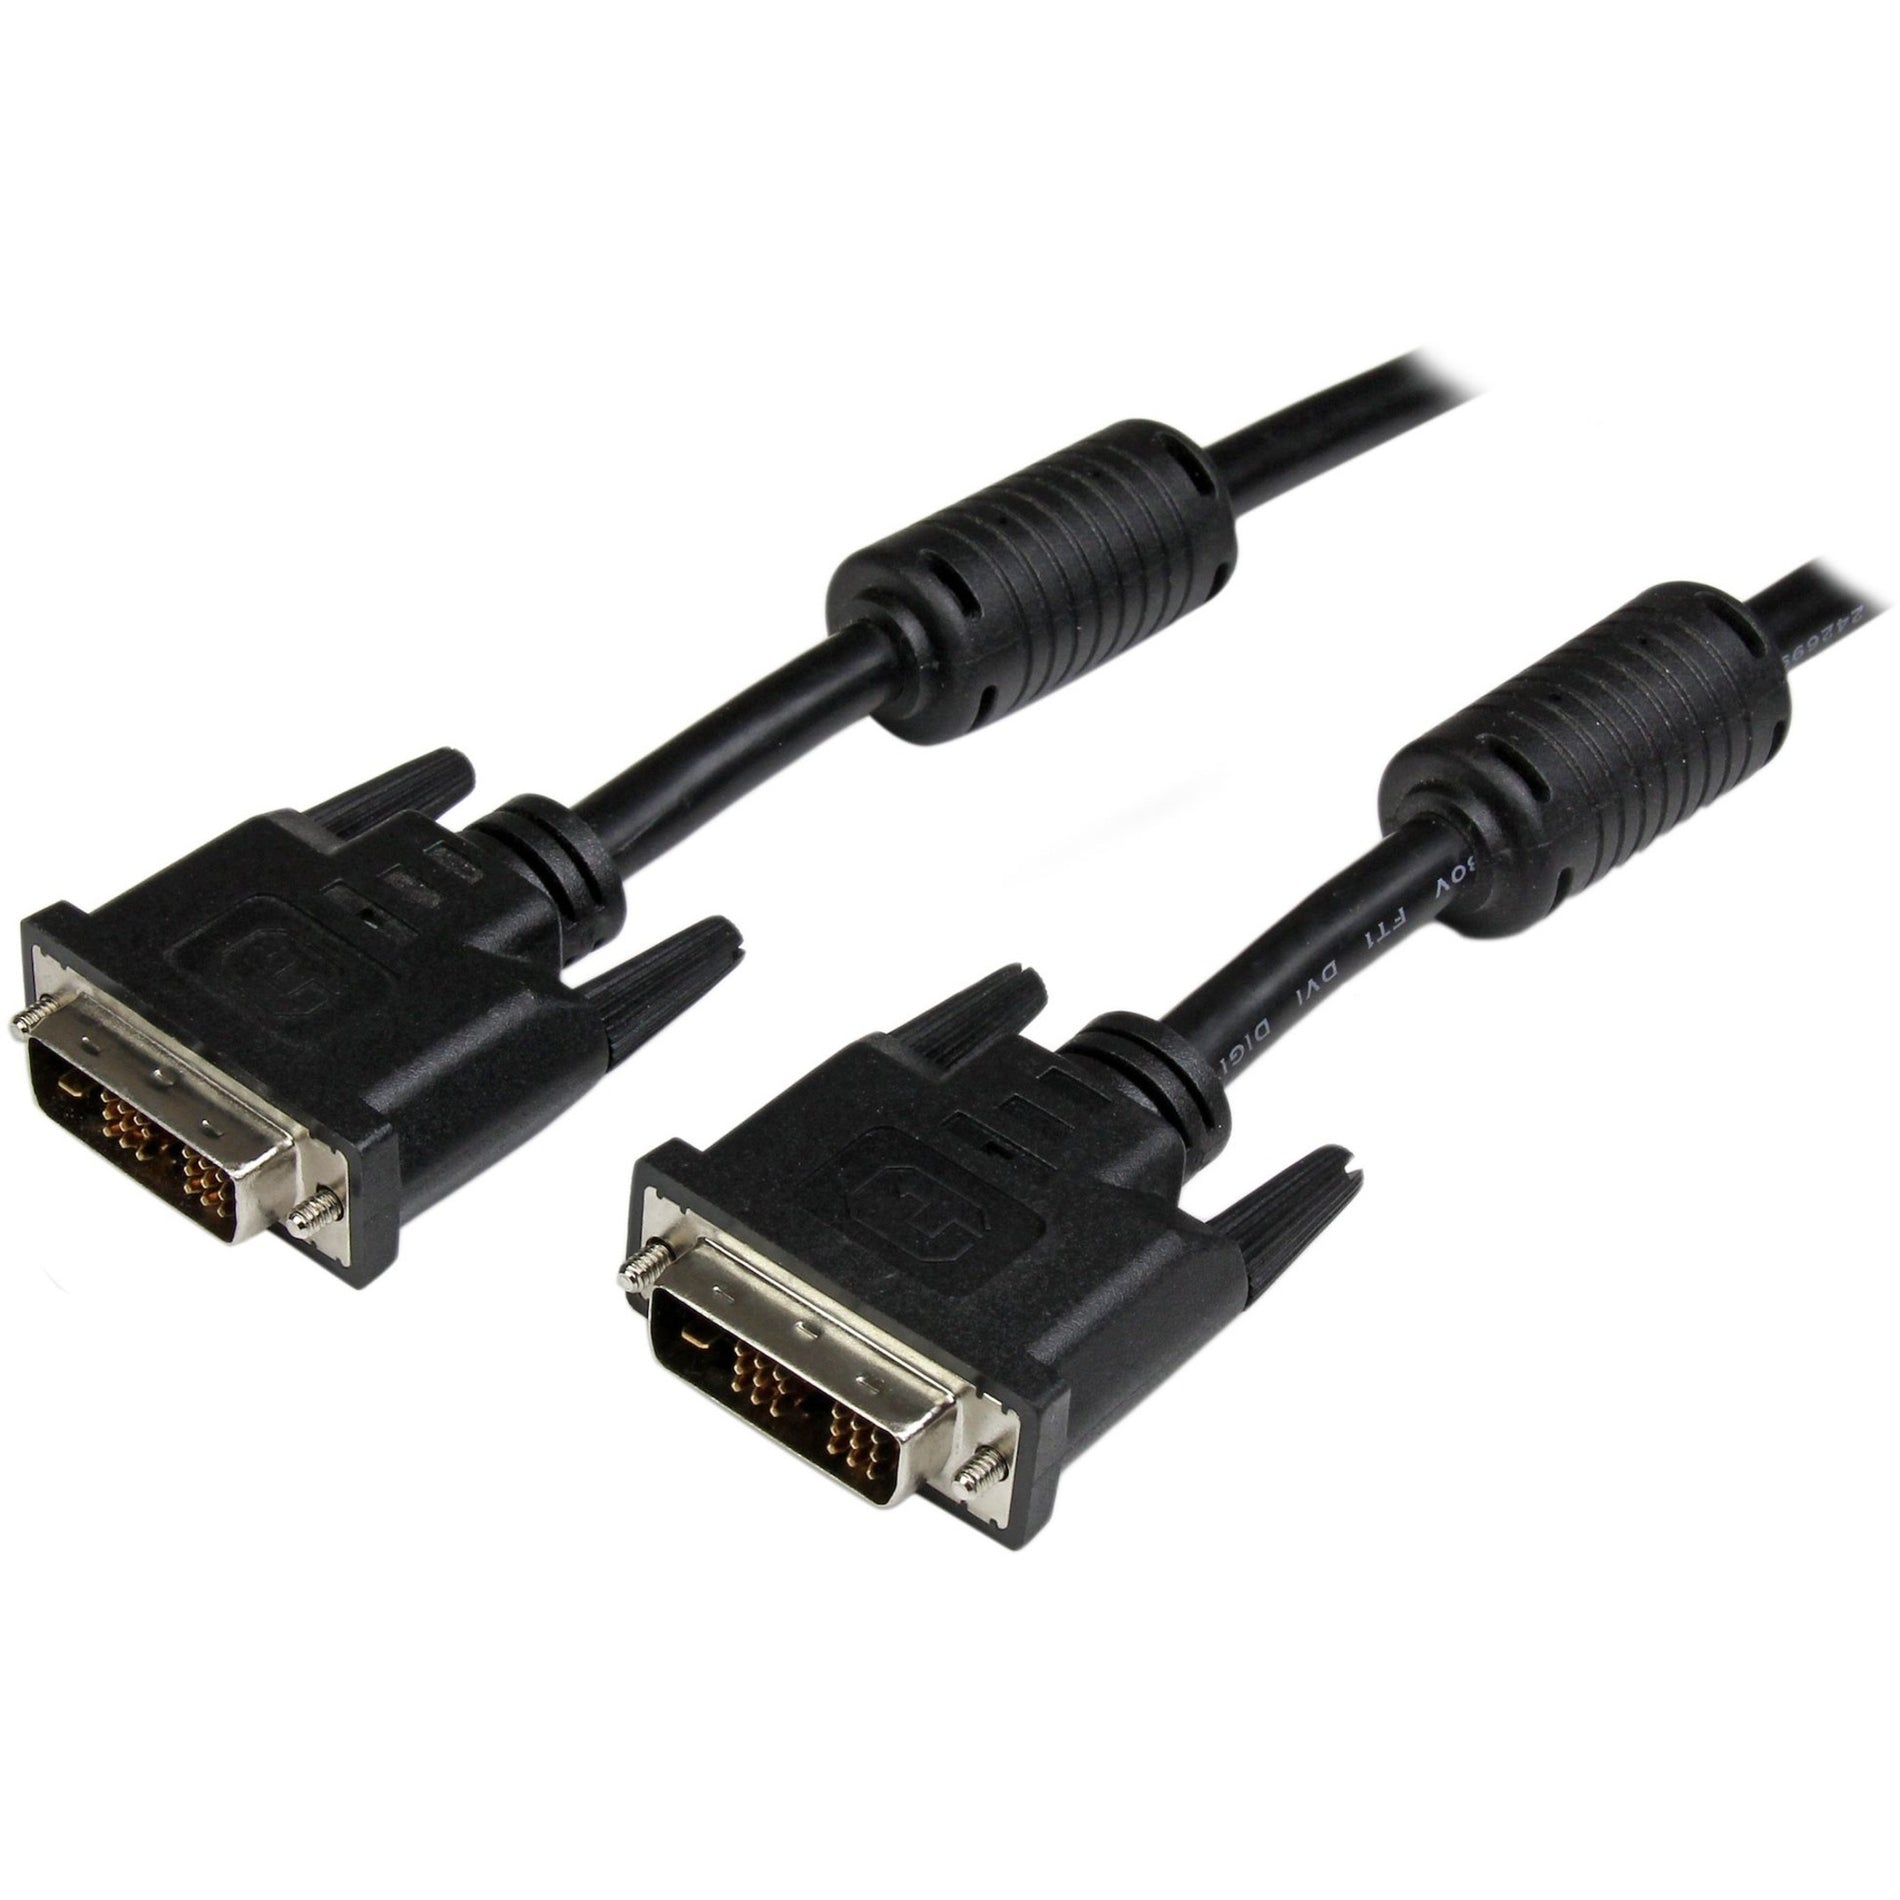 StarTech.com DVIDSMM25 DVI-D Single Link Cable - M/M, 25 ft Video Cable, 1920 x 1200 Supported Resolution